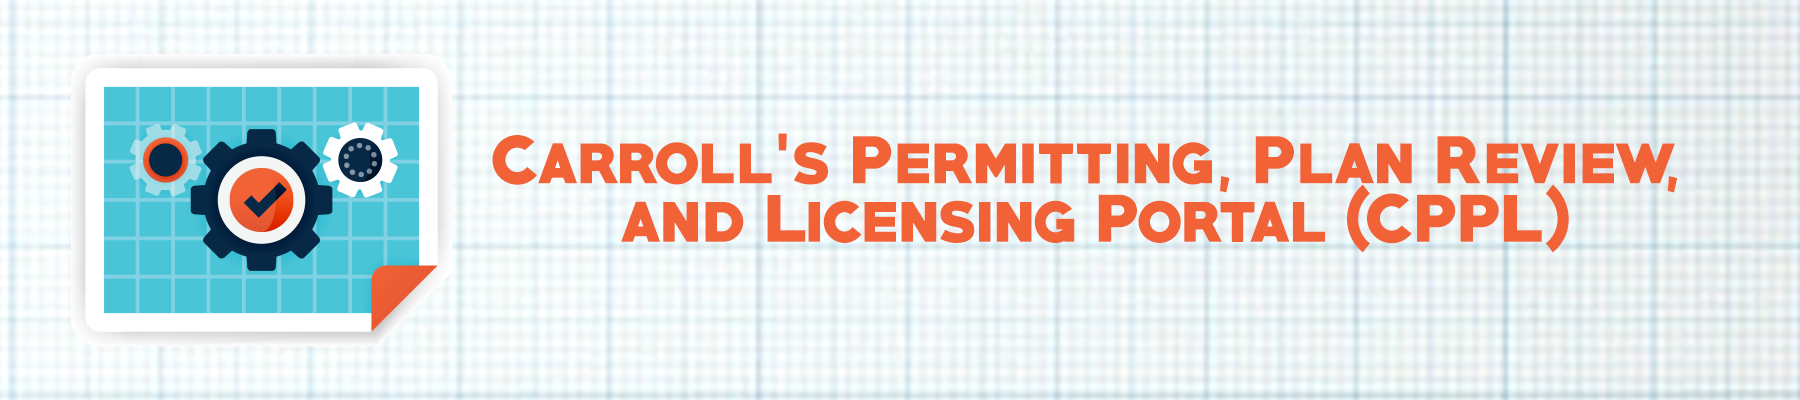 Carroll’s Permitting, Plan Review, and Licensing Portal (CPPL)